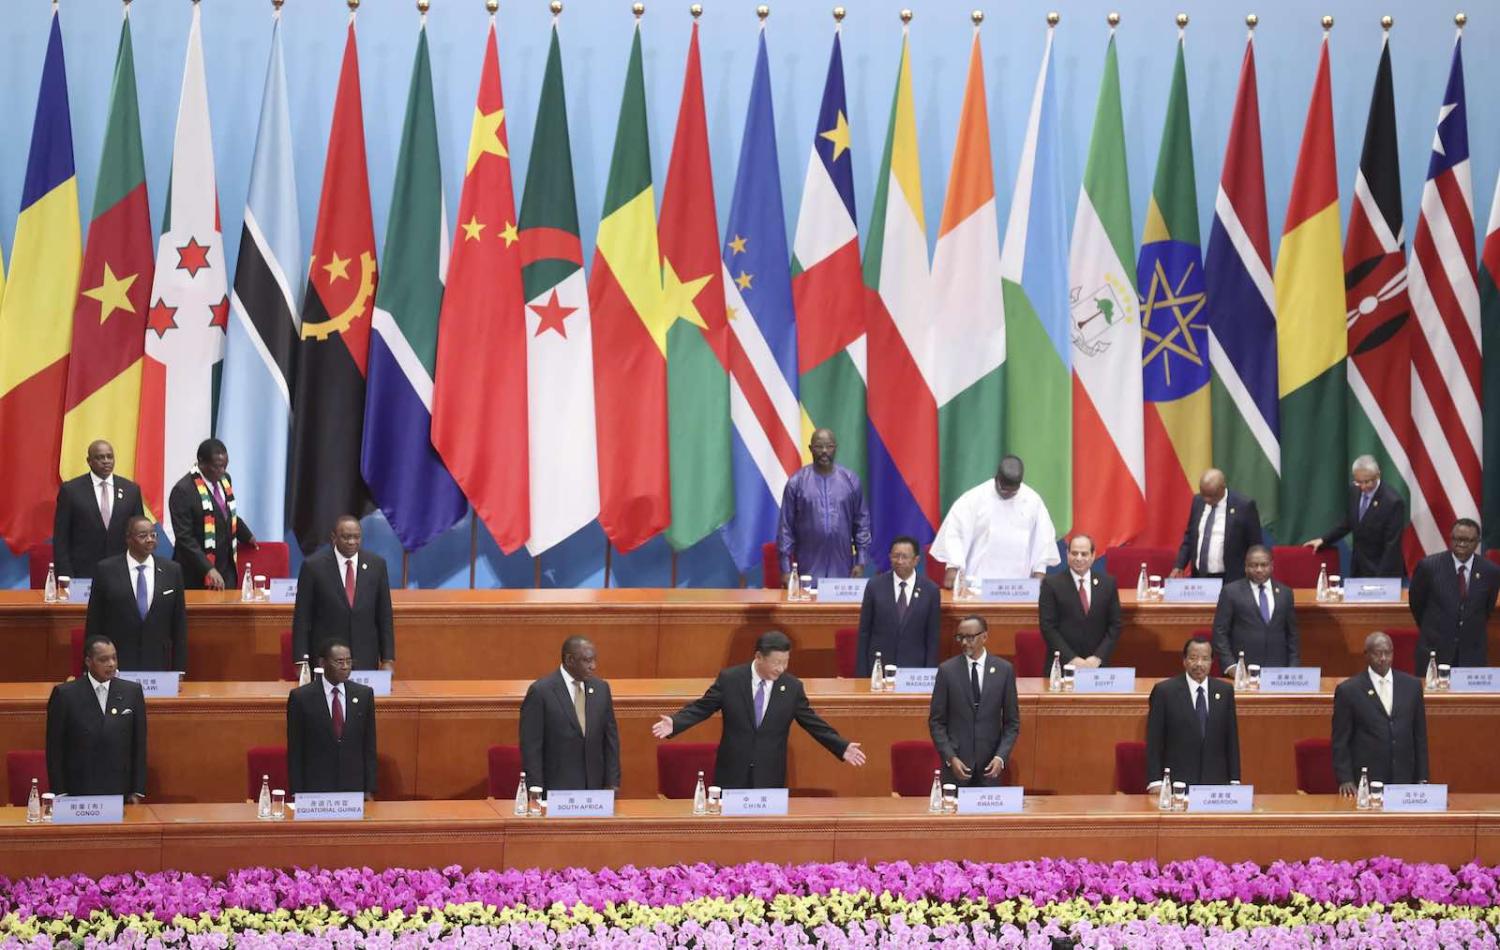 China's President Xi Jinping hosts the Forum on China-Africa Cooperation on 3 September in Beijing, China (Photo: Sheng Jiapeng via Getty)